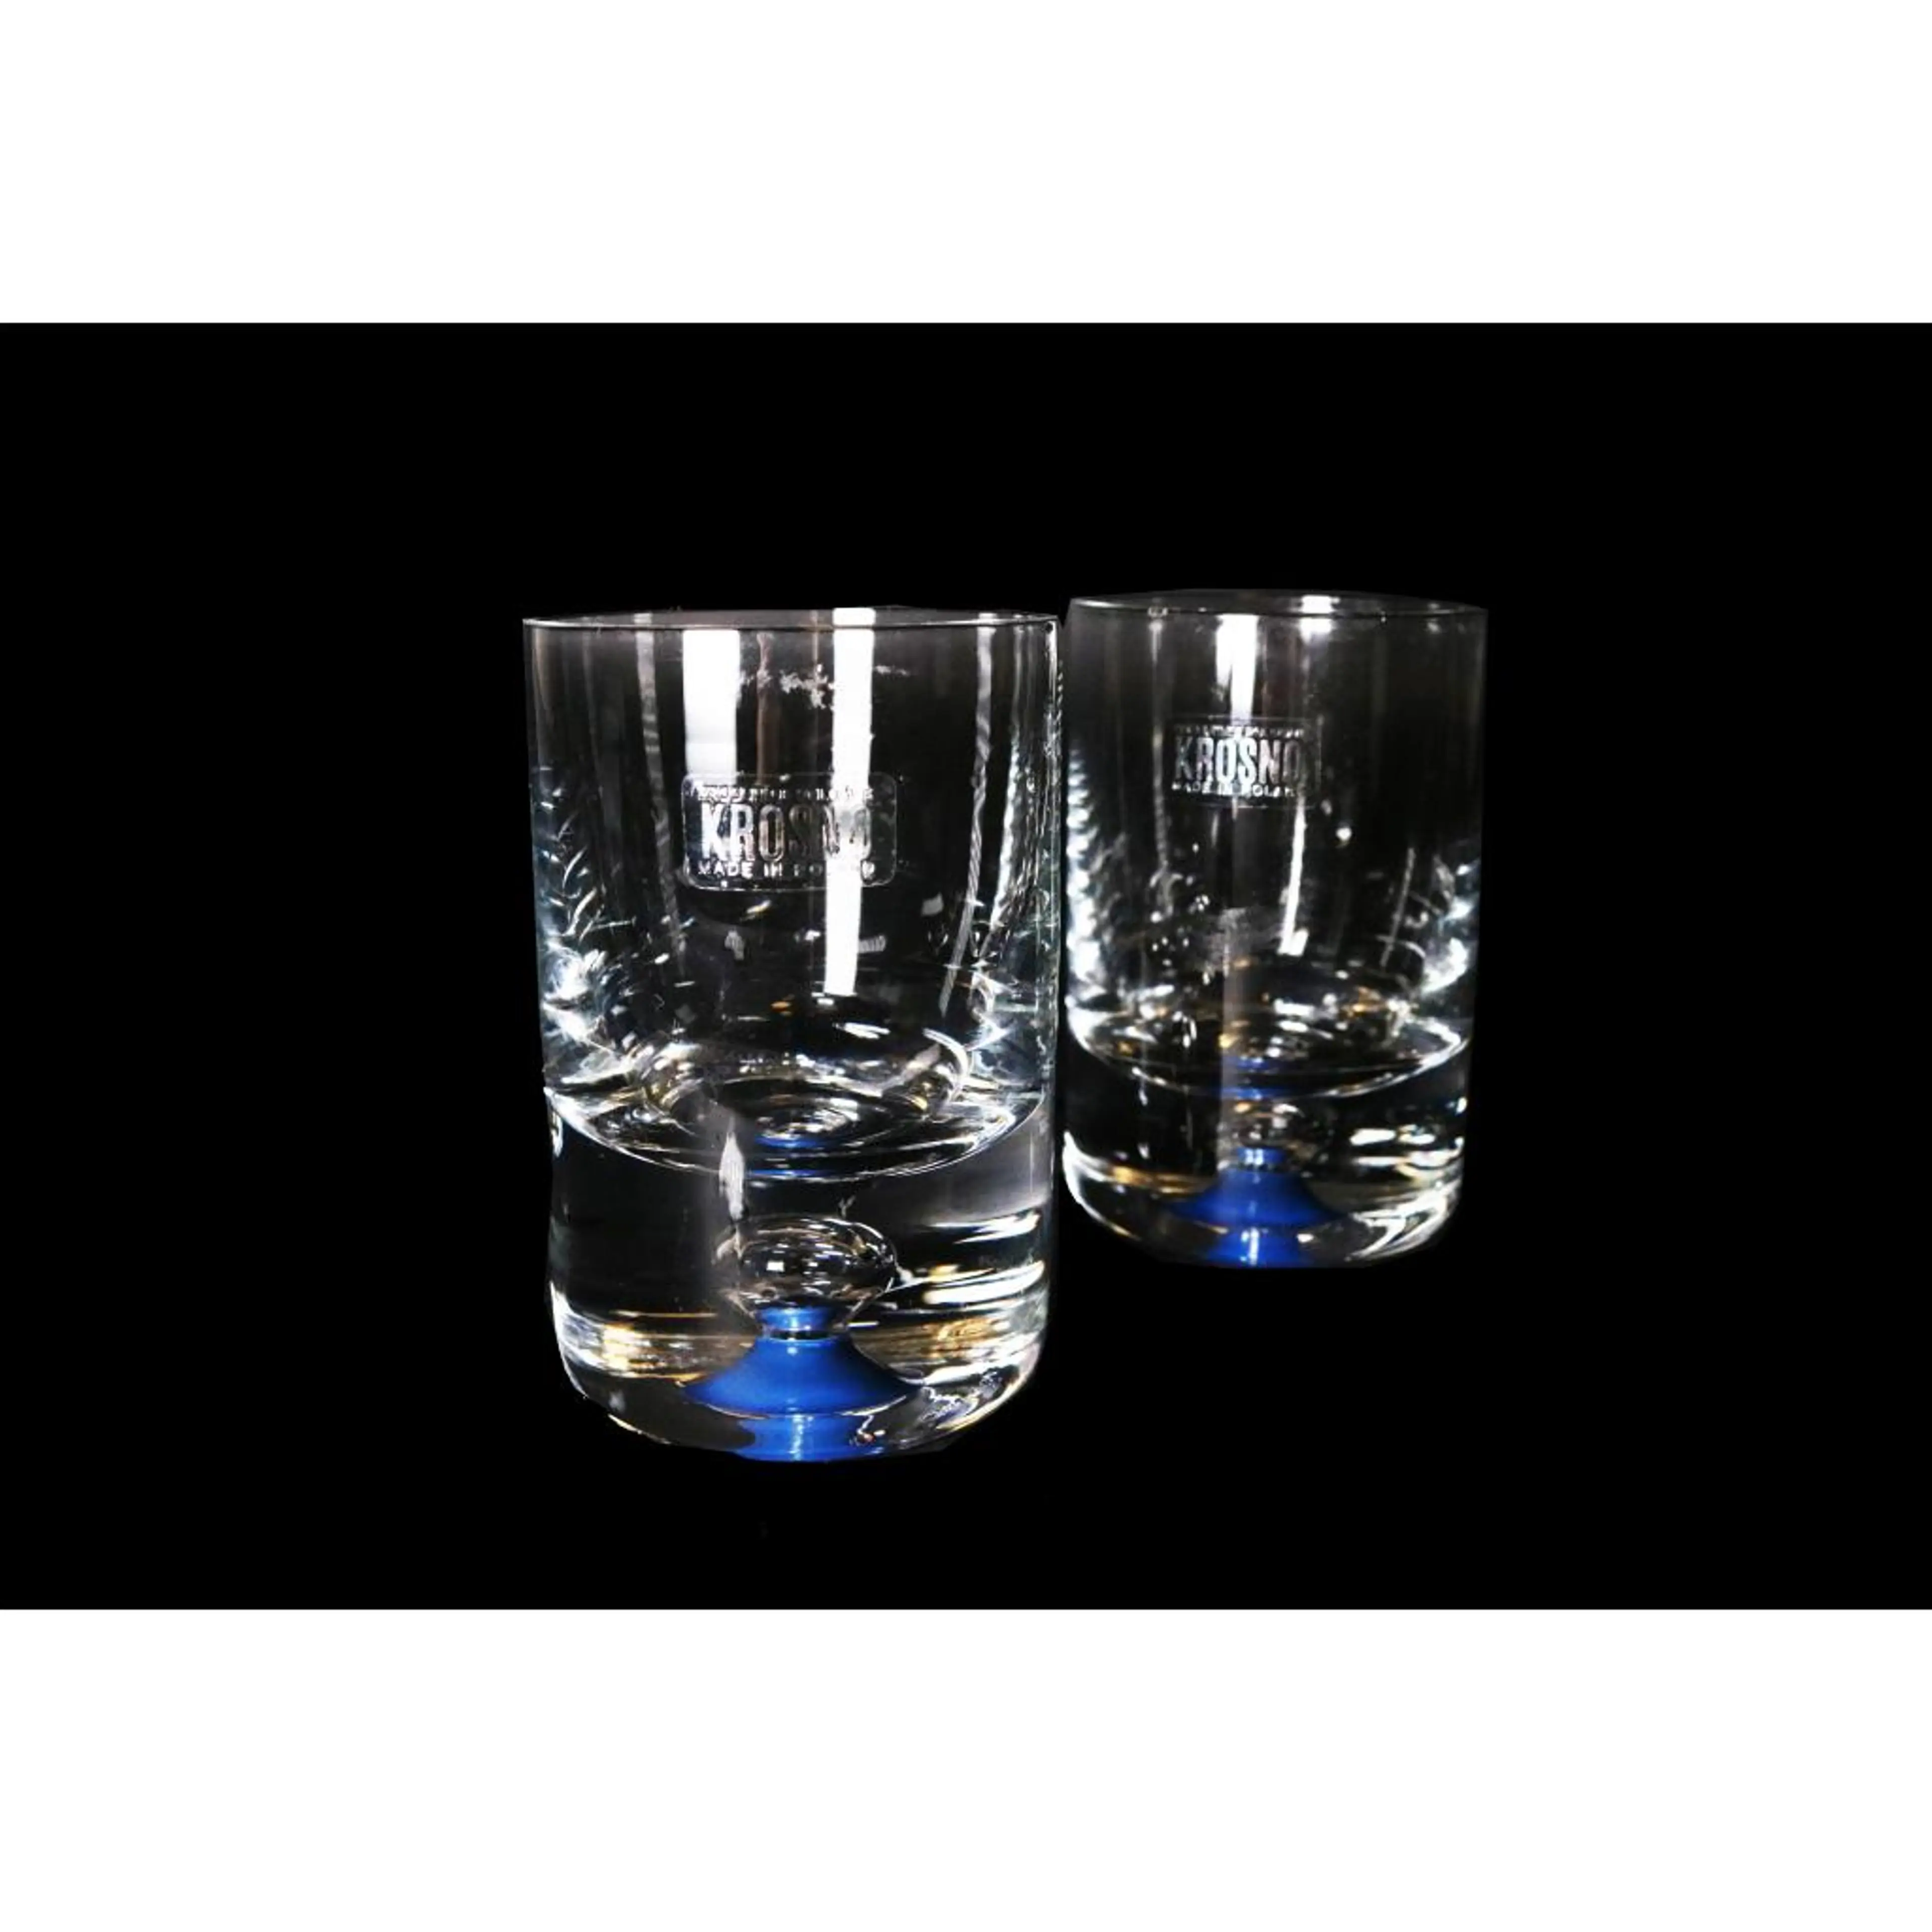 Alcohol glasses with blue color on bottom 6pcs.